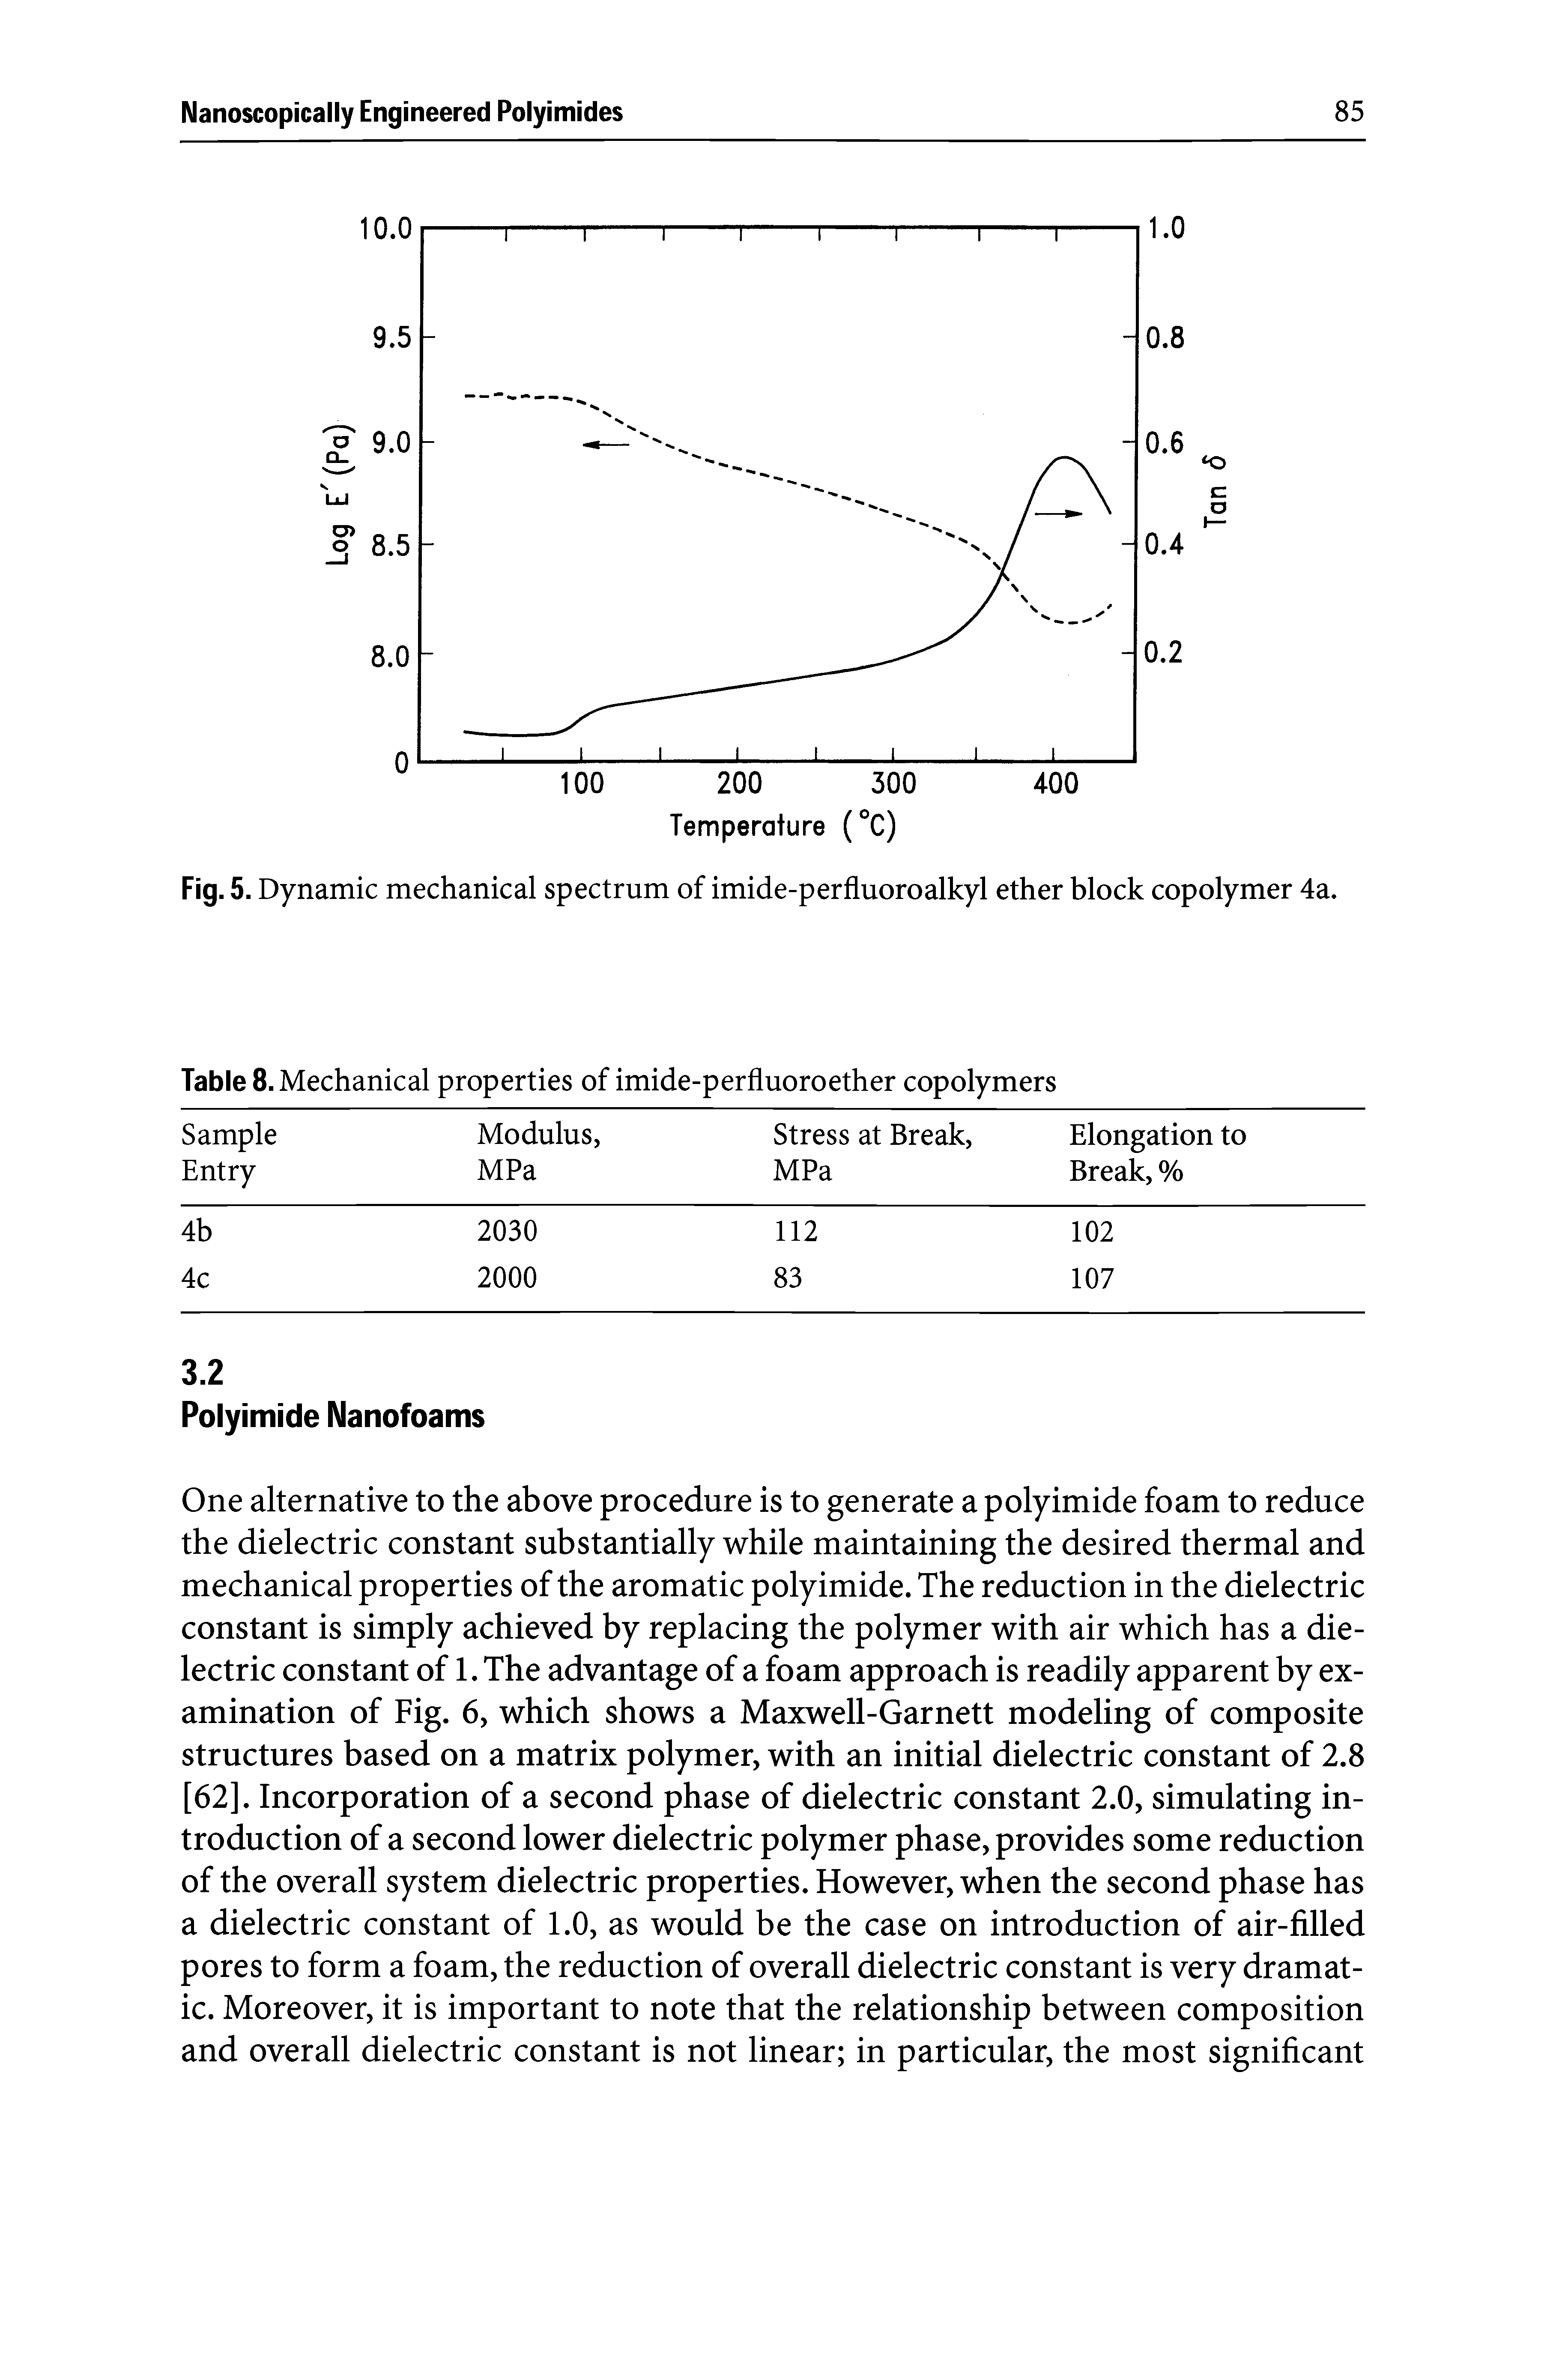 Fig. 5. Dynamic mechanical spectrum of imide-perfluoroalkyl ether block copolymer 4a.